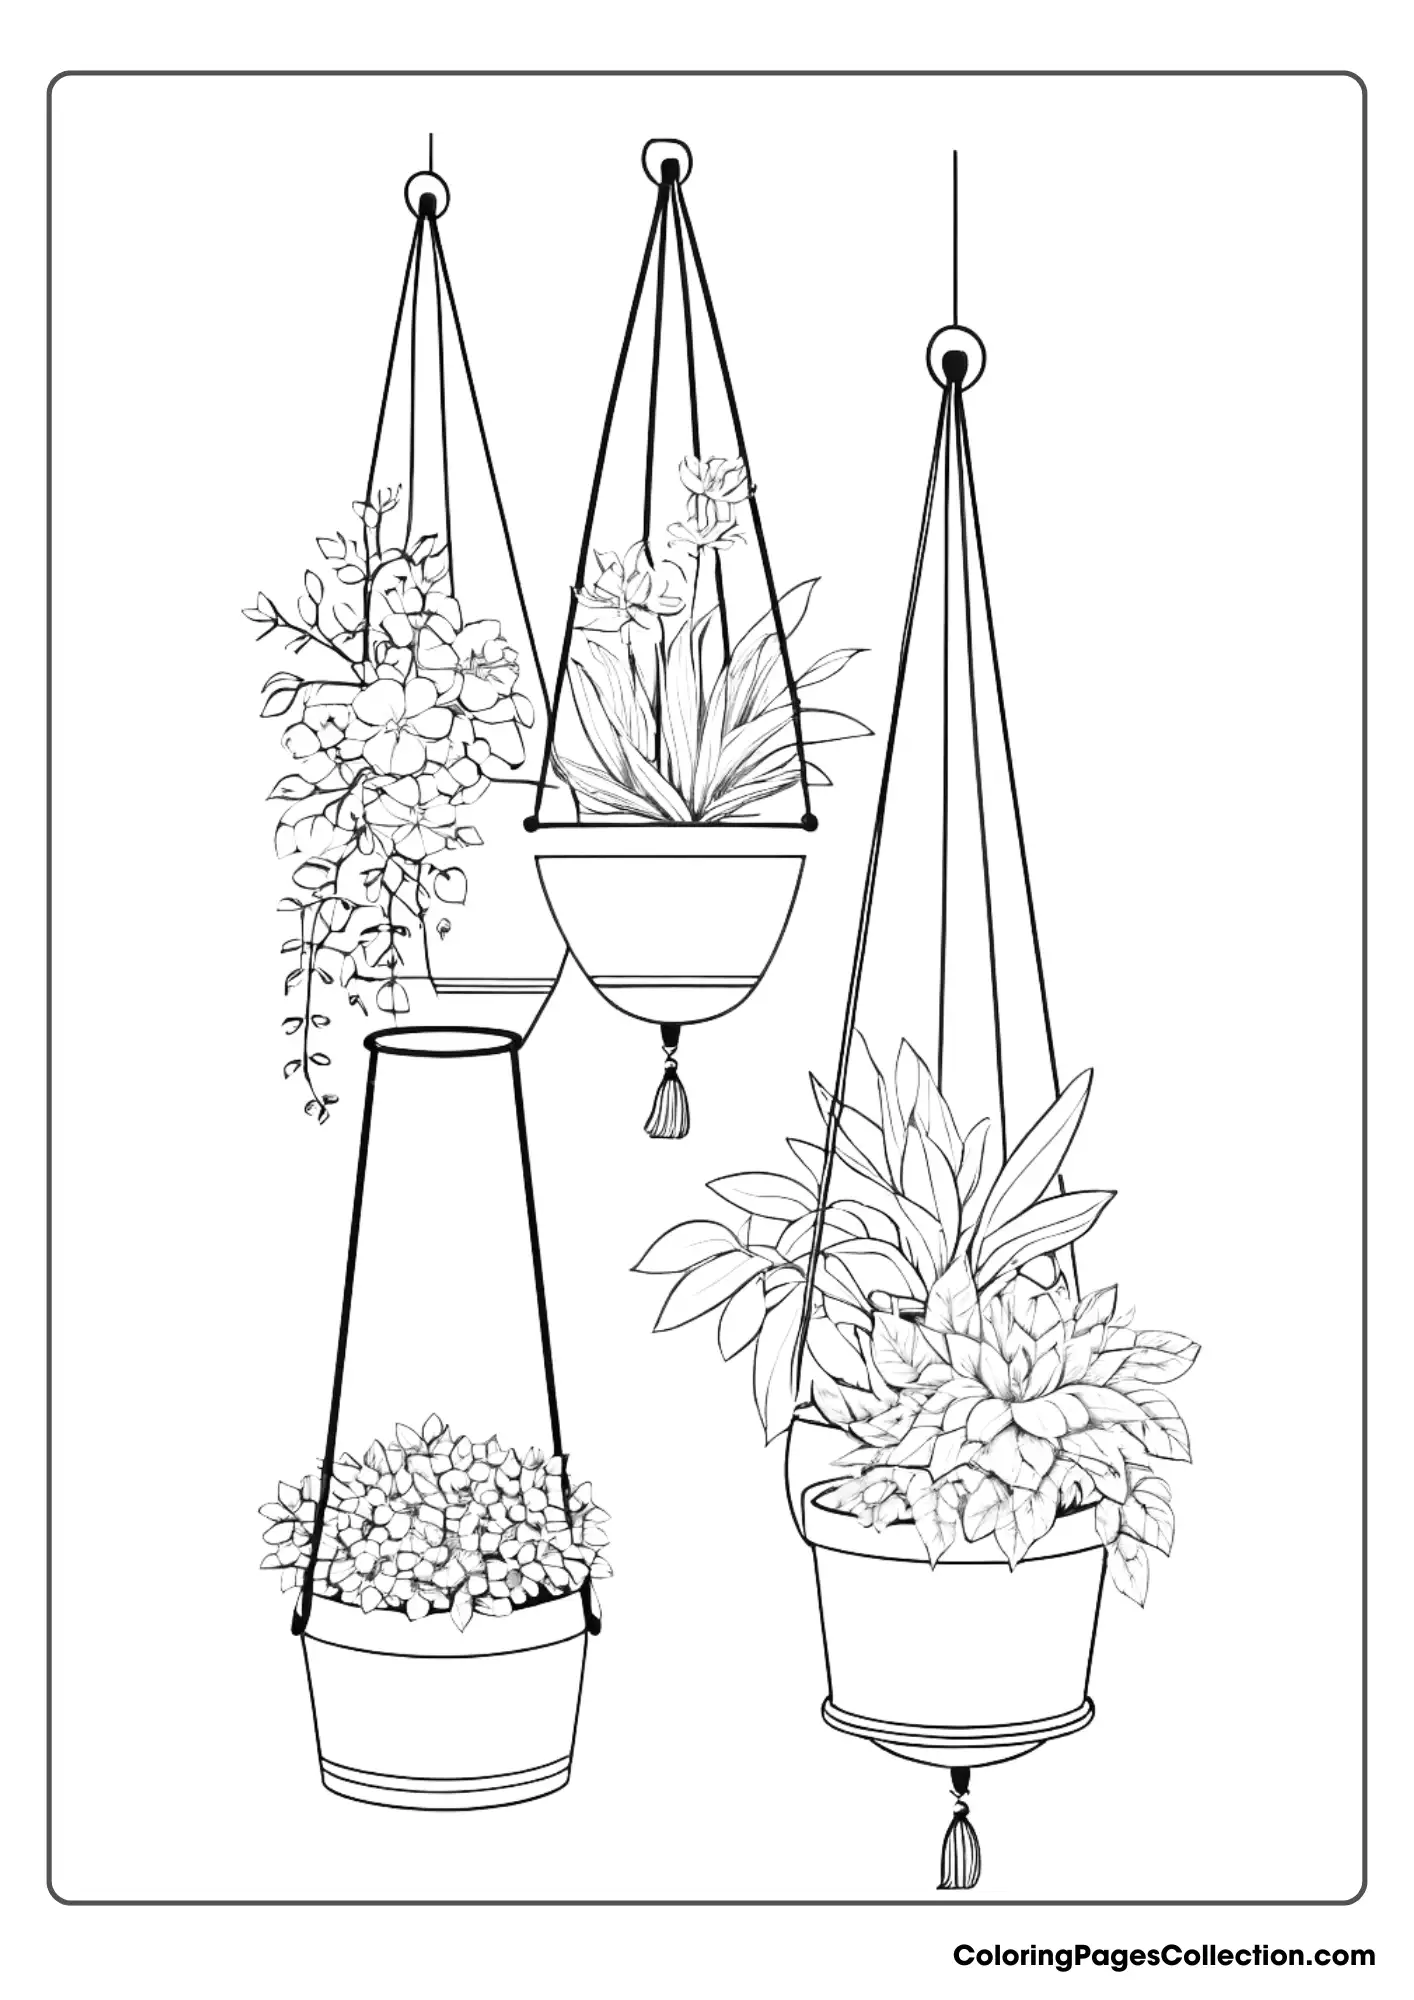 Four Hanging Planters With Plants In Them